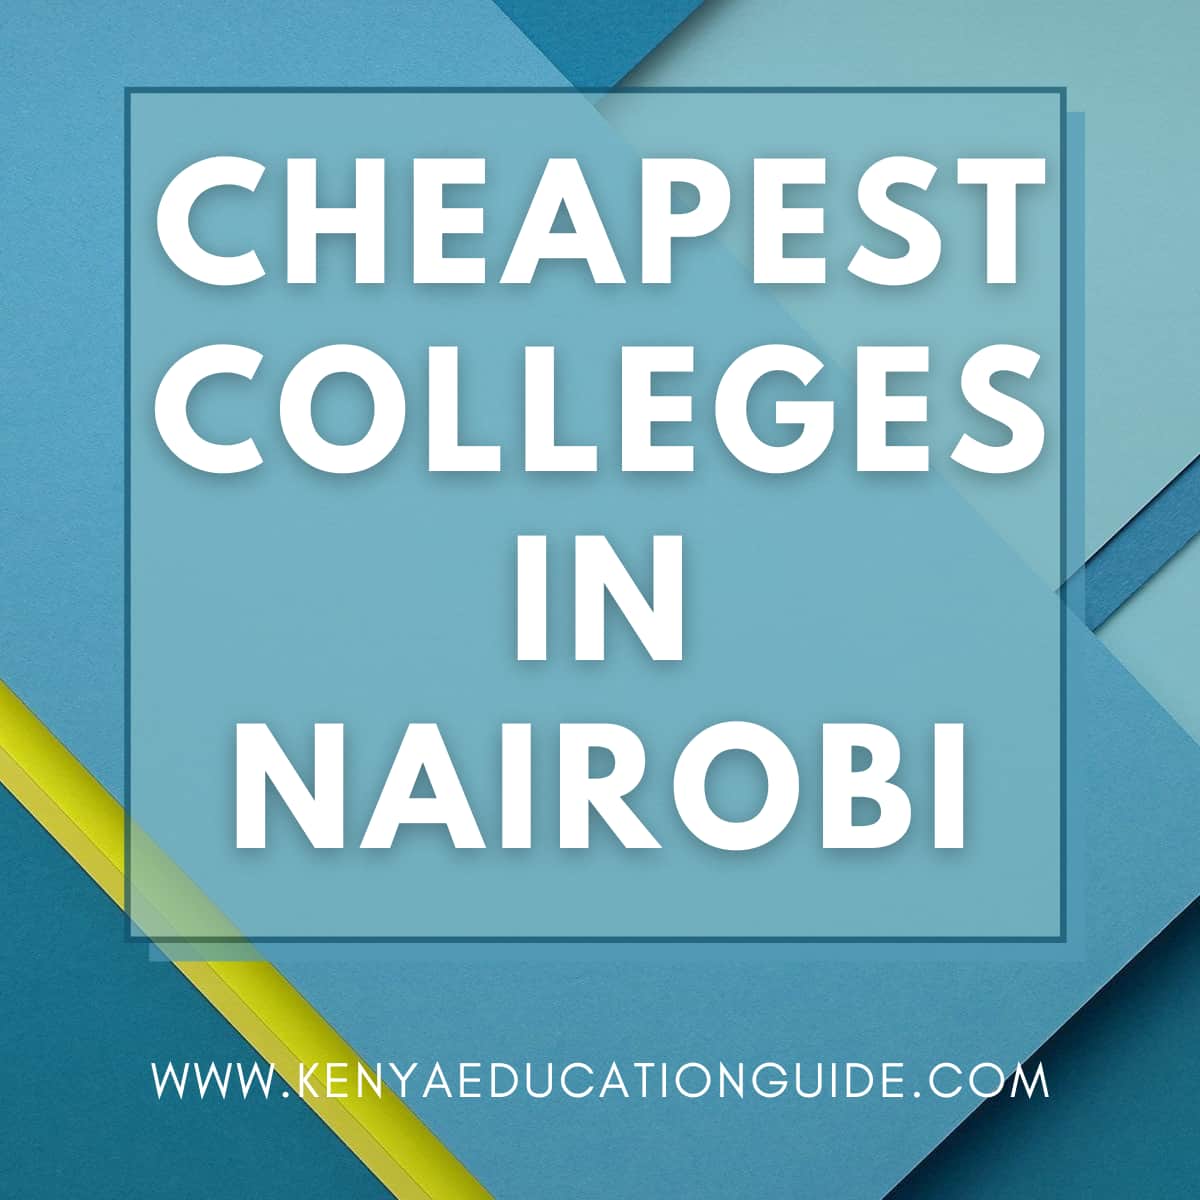 Cheapest Colleges in Nairobi